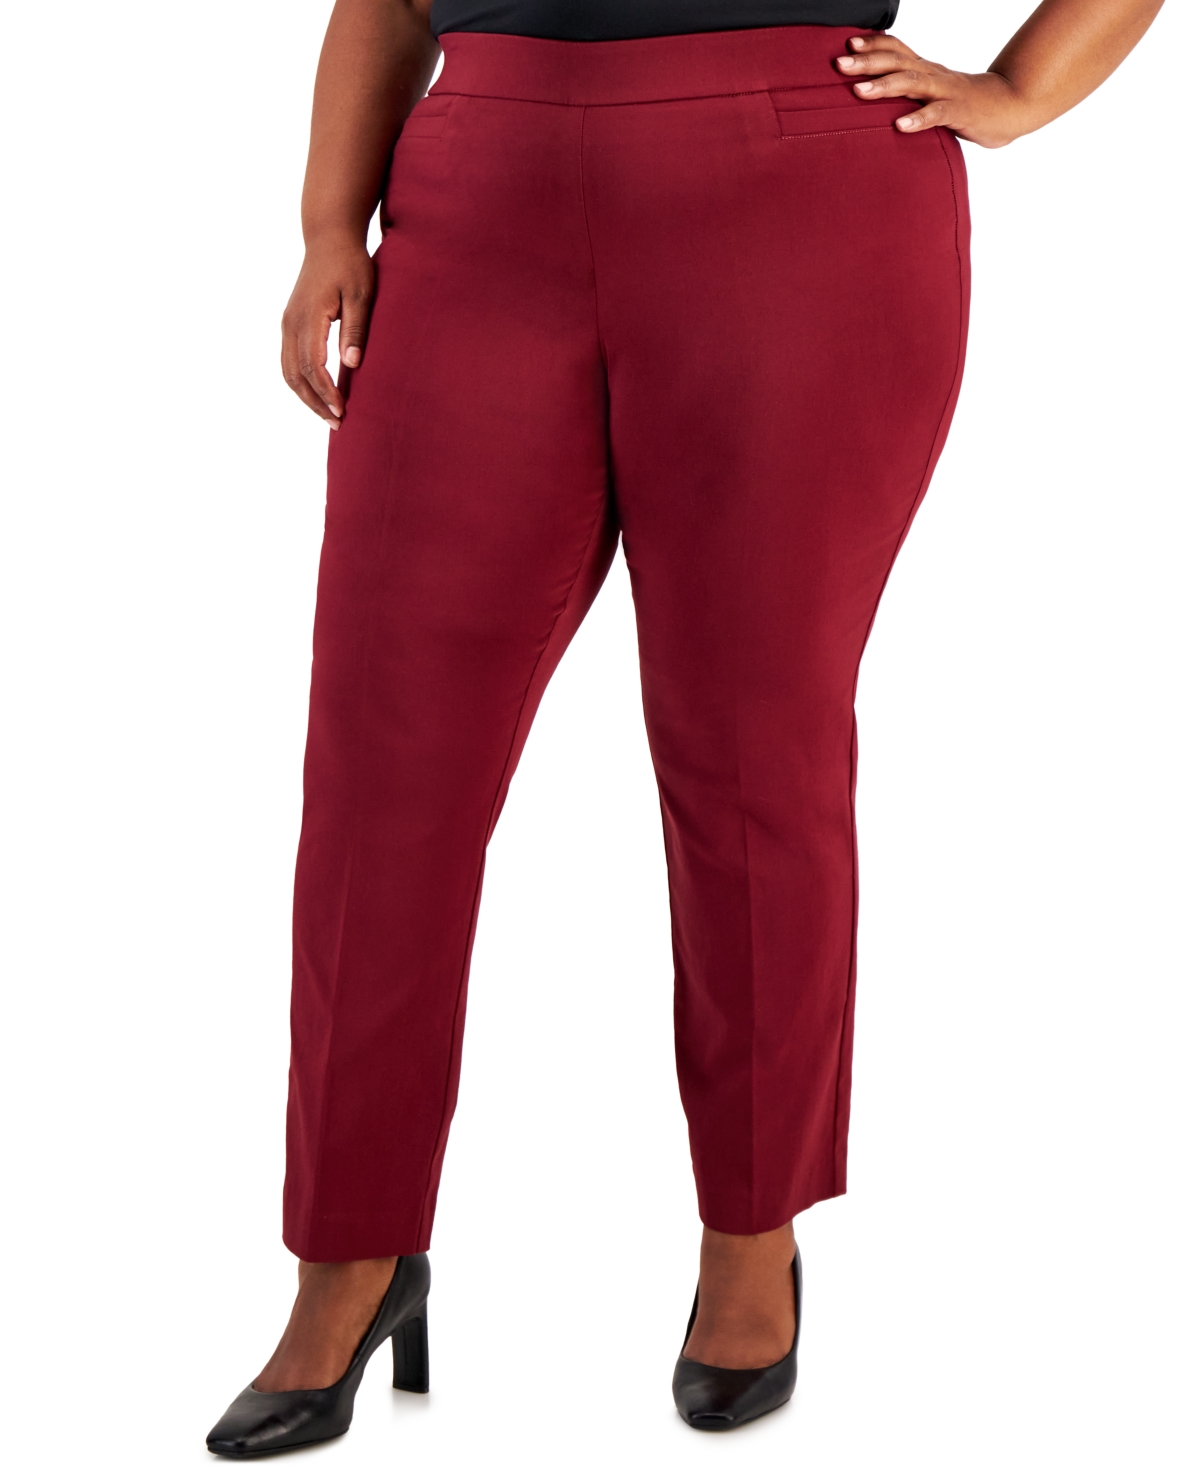 Plus Size High-Rise Pull-On Pants, Created for Macy's - Dark Rust